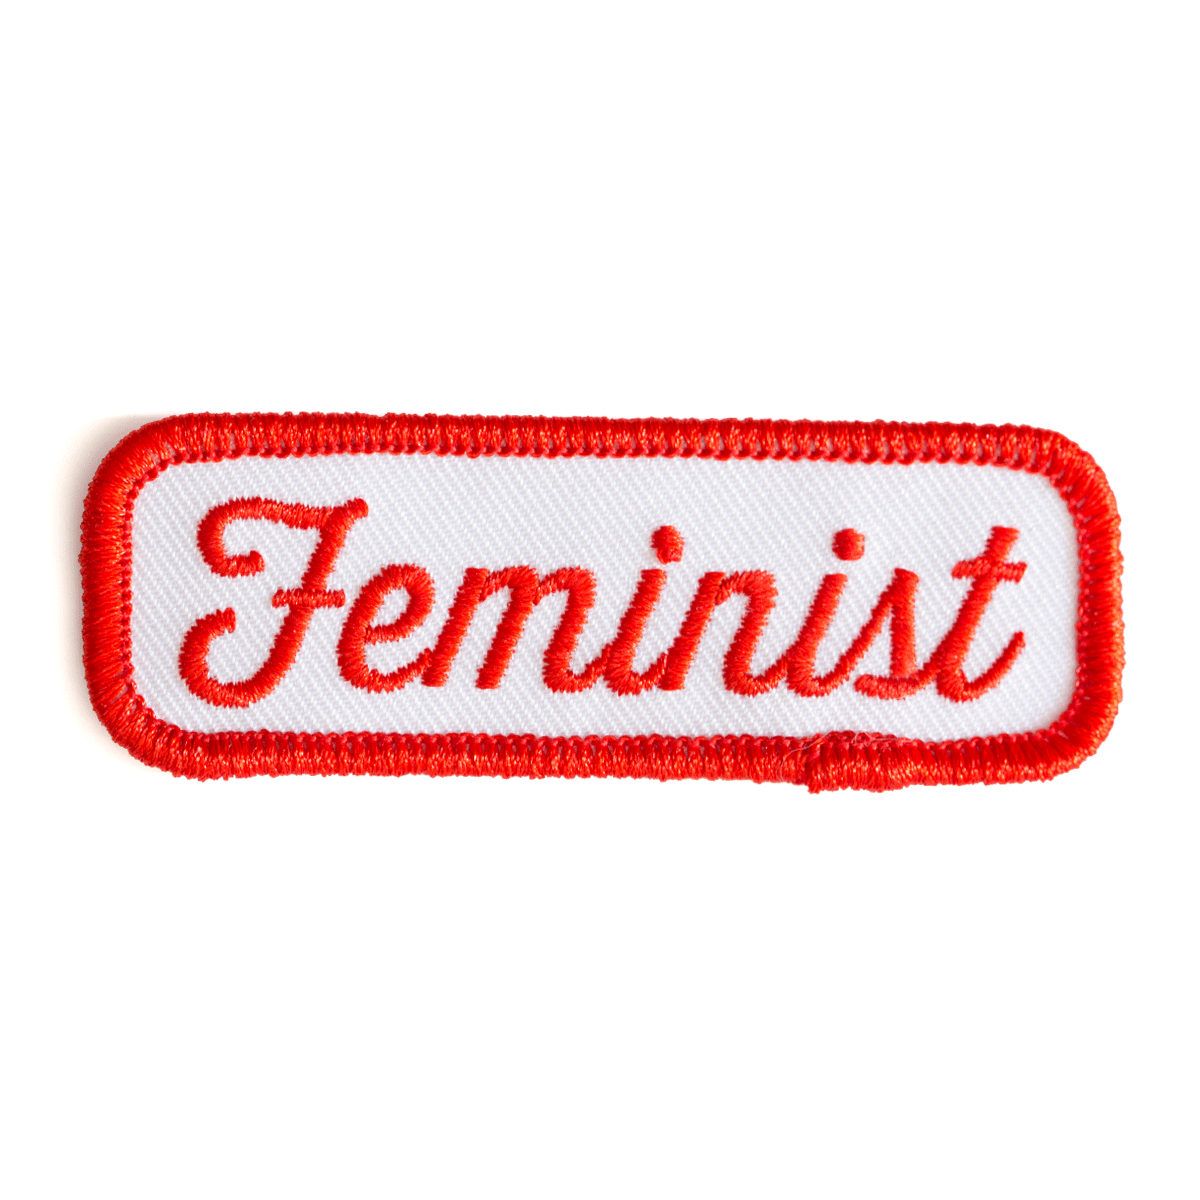 Feminist Embroidered Iron-On Patch